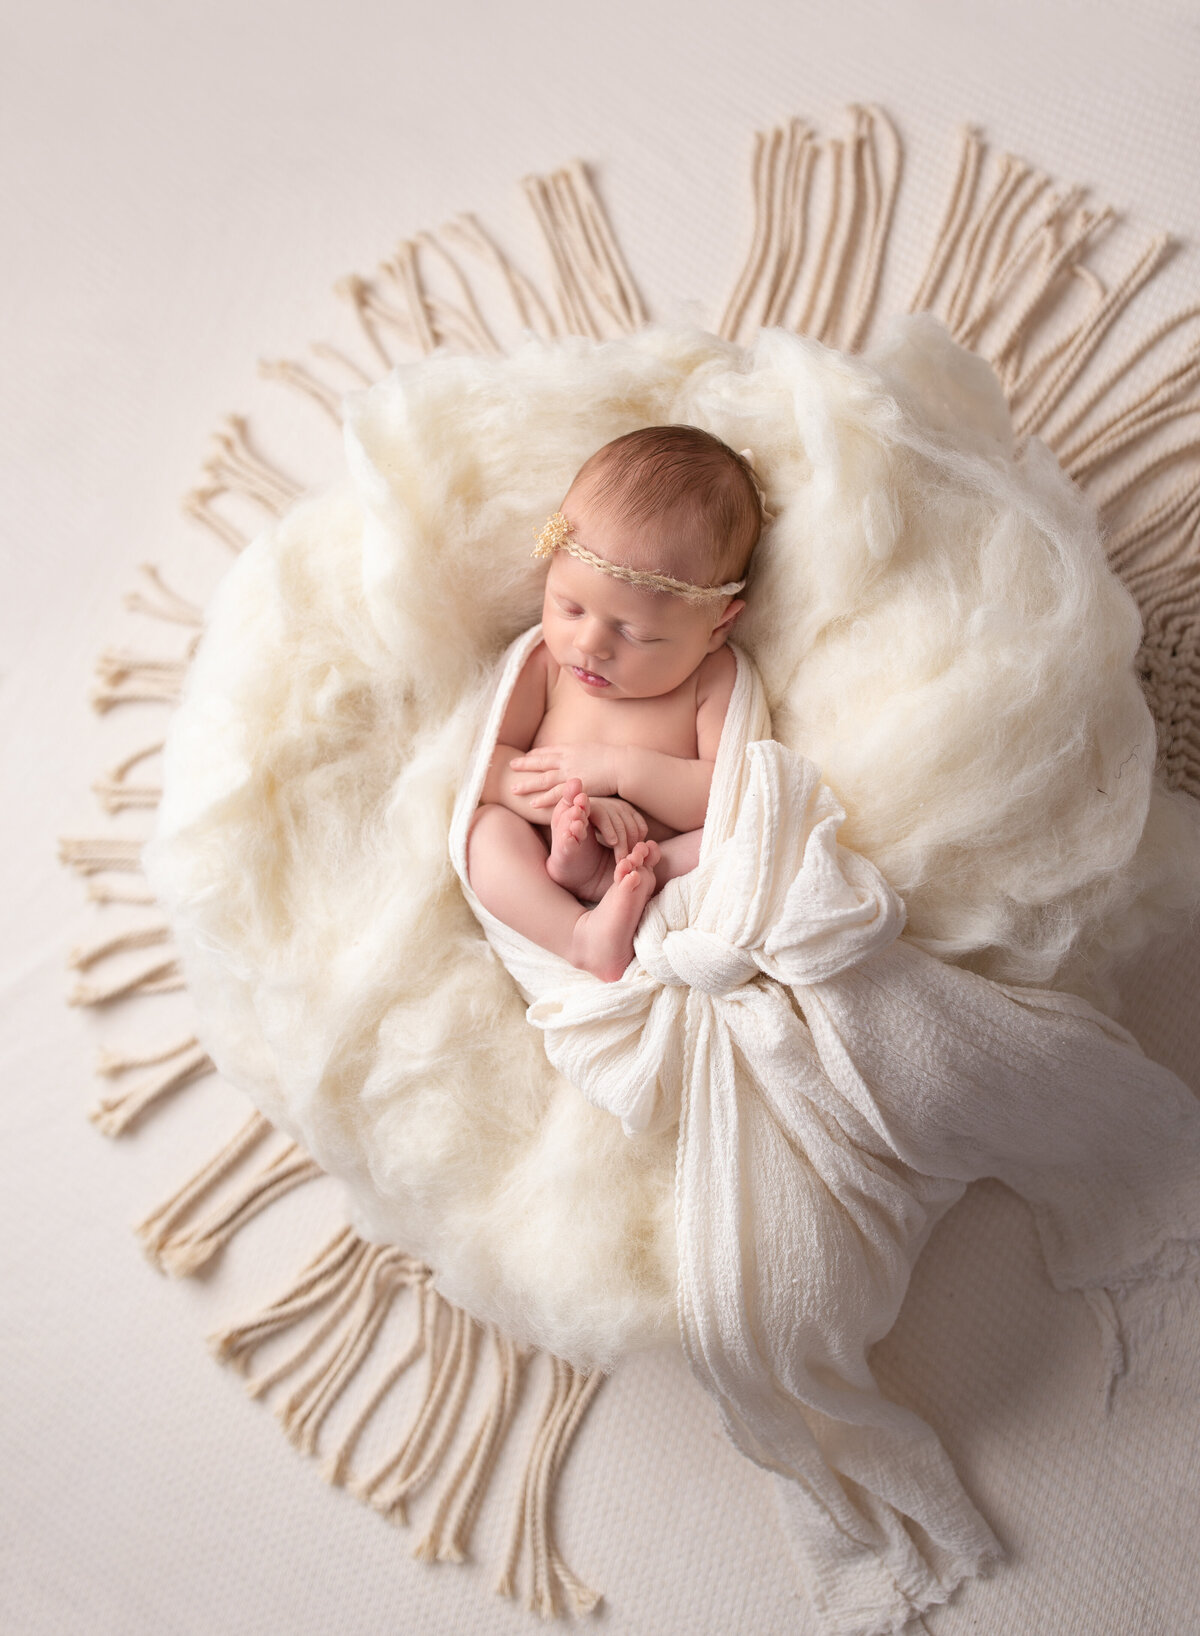 A perfect baby girl on a white cloud of fluff. Photo by Diane Owen.